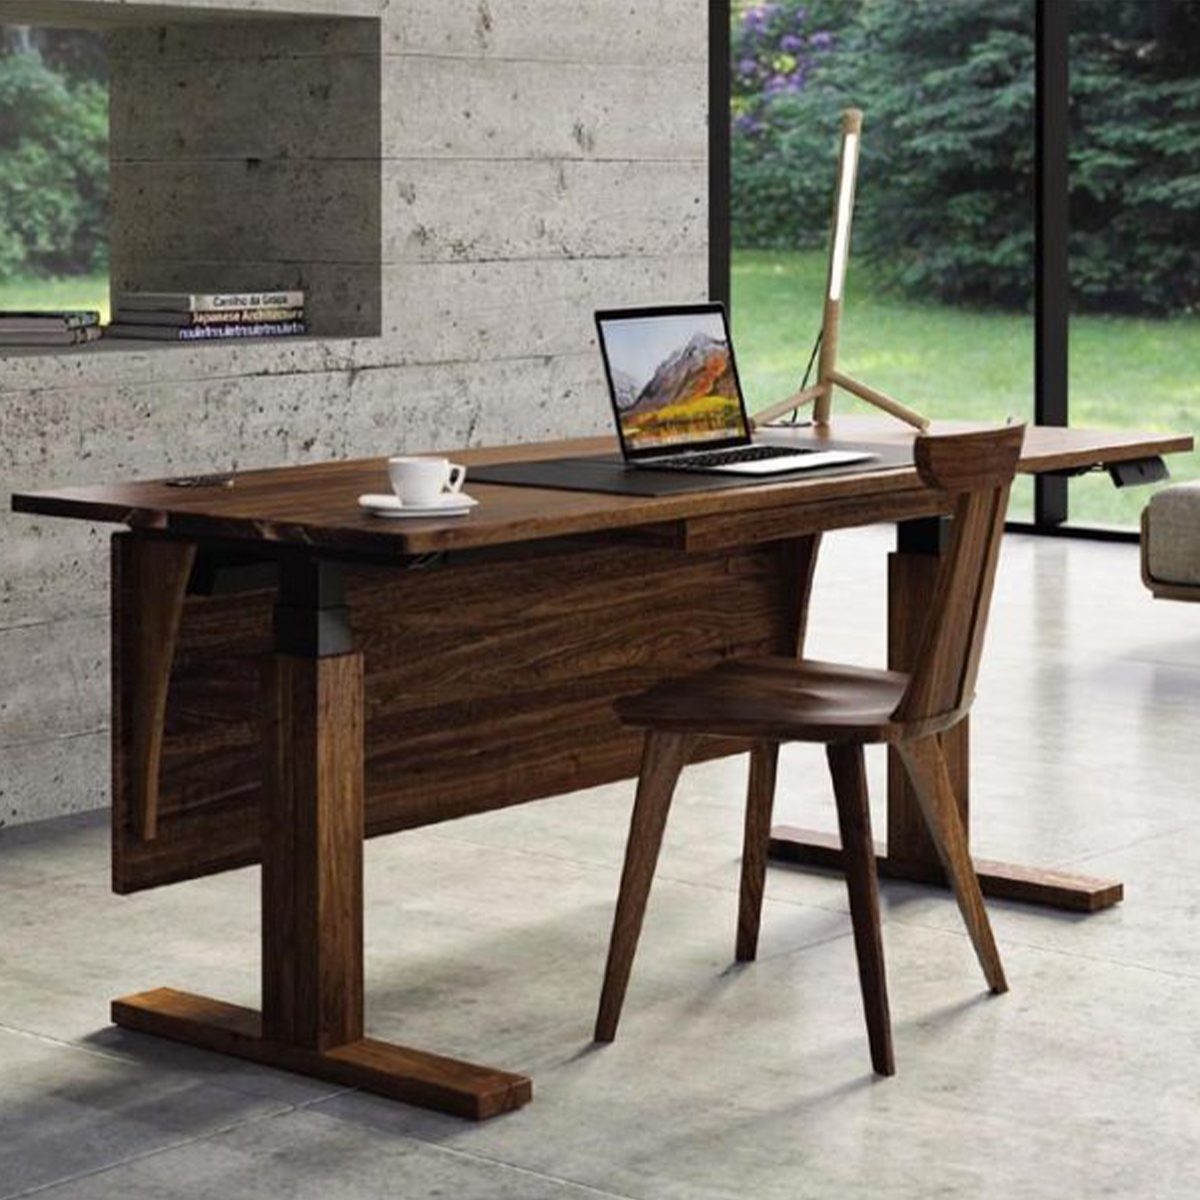 10 Sustainable Furniture Companies To Know